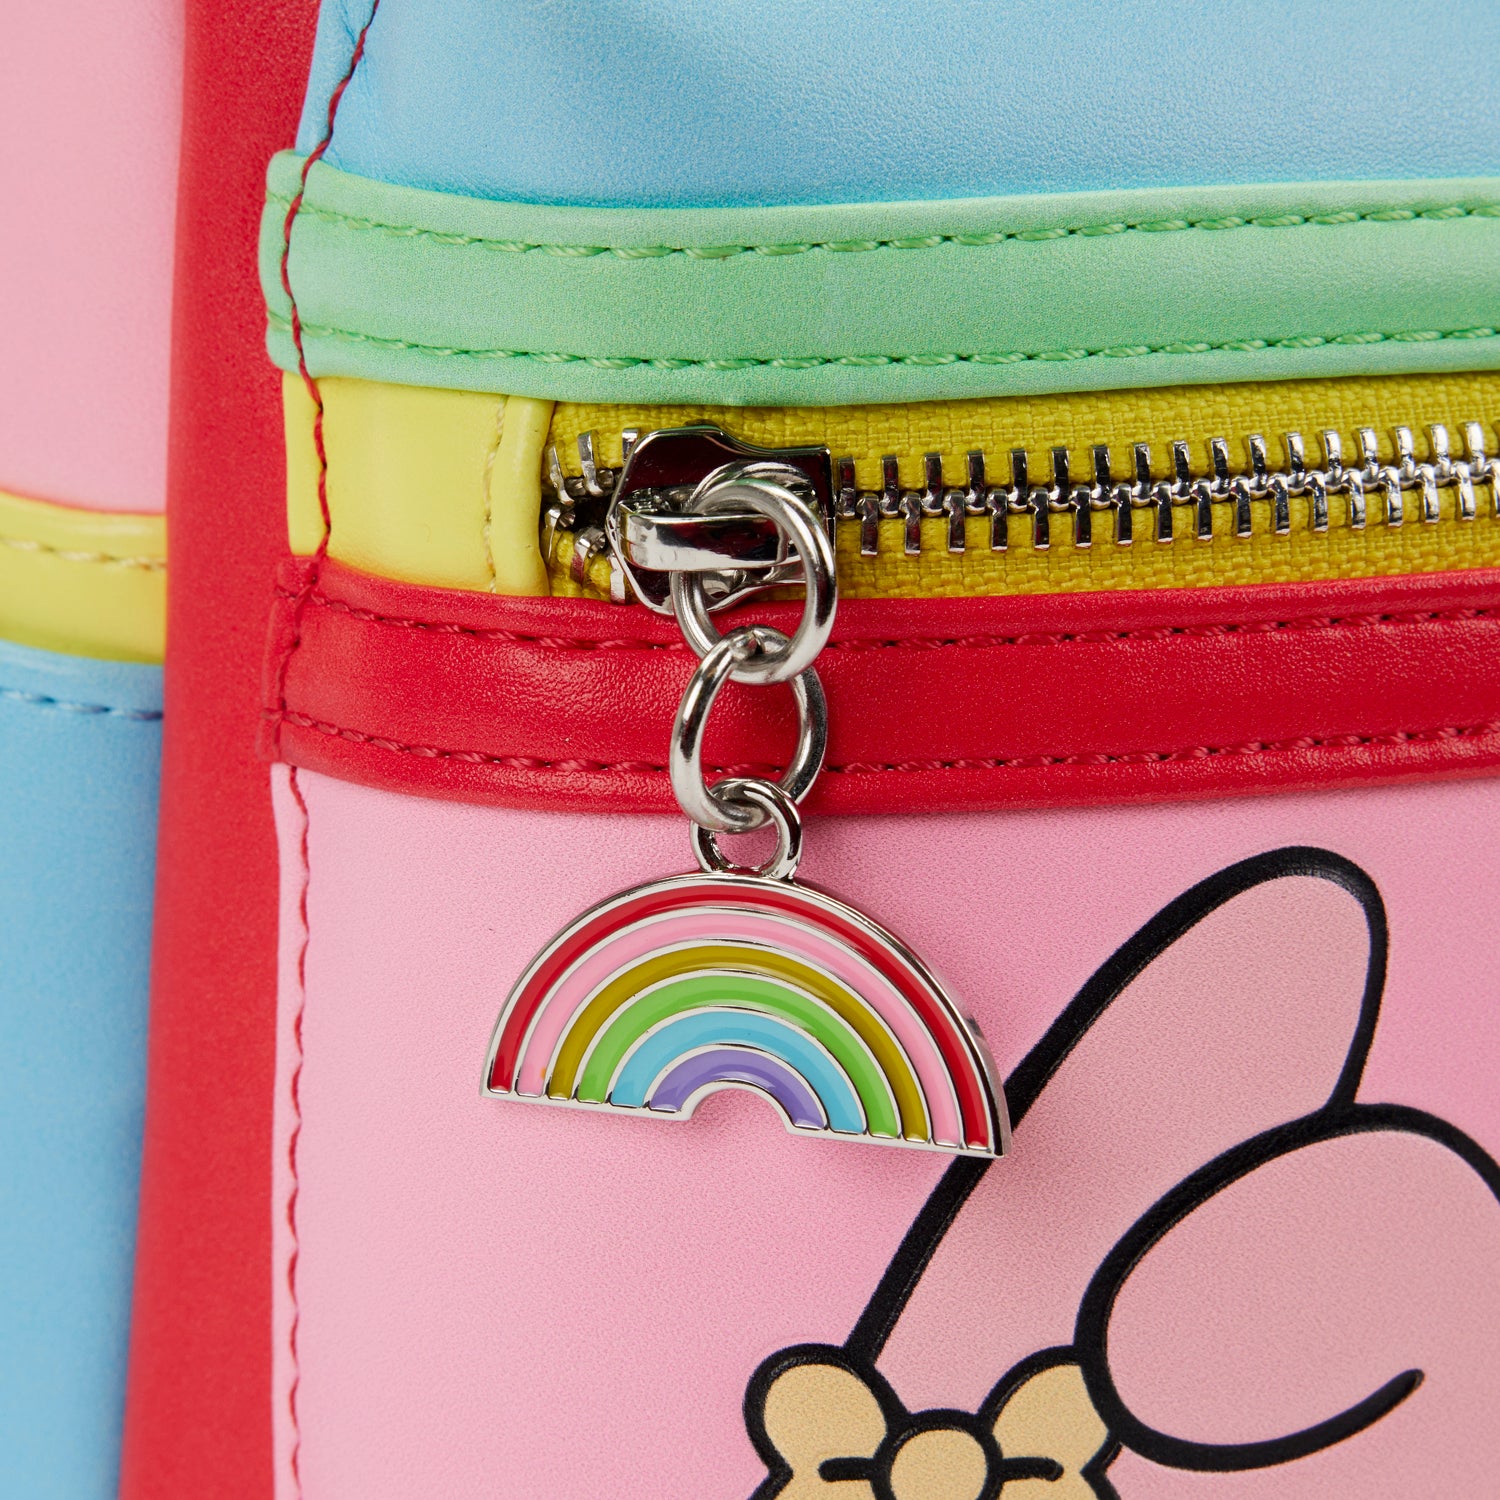 Loungefly x Sanrio: Hello Kitty & Friends Color Block Mini Backpack